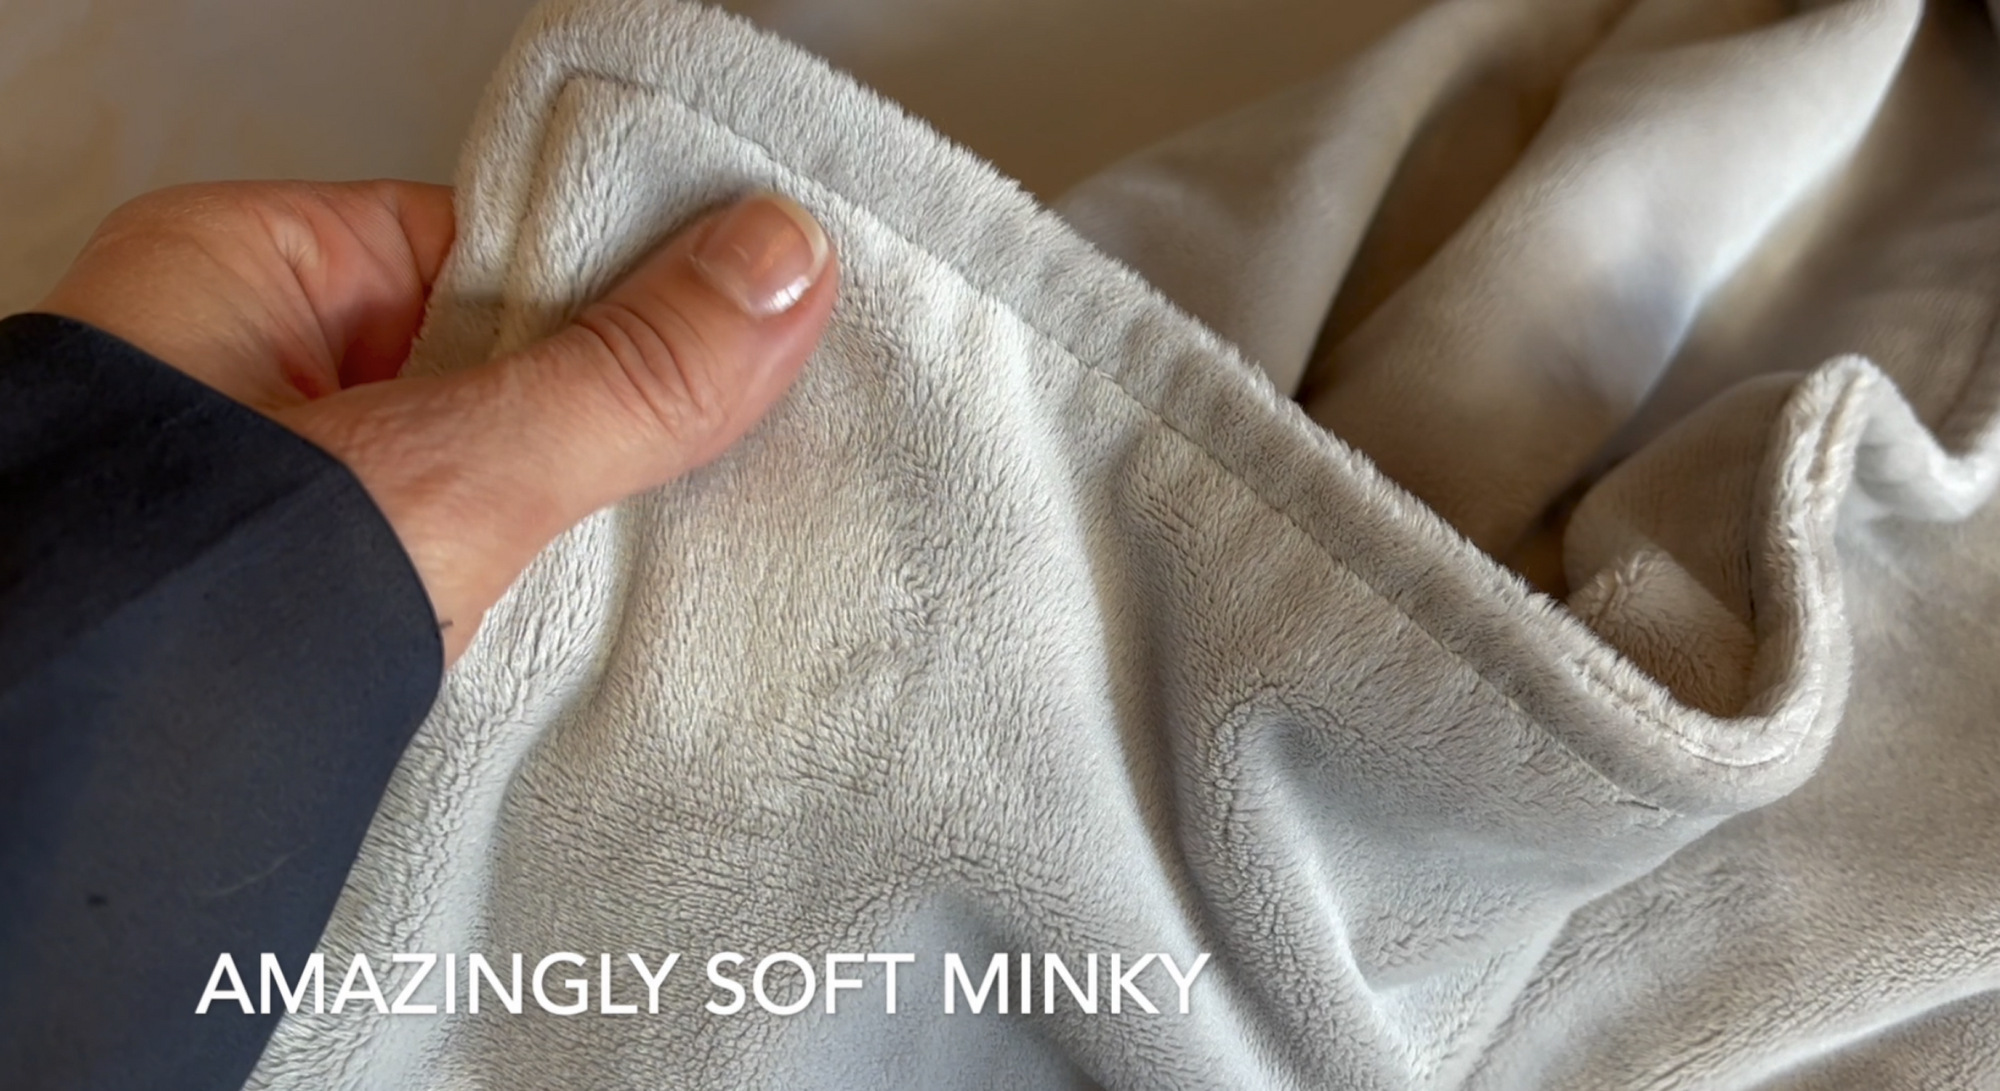 What in the world is a Minky Sheet Blanket????